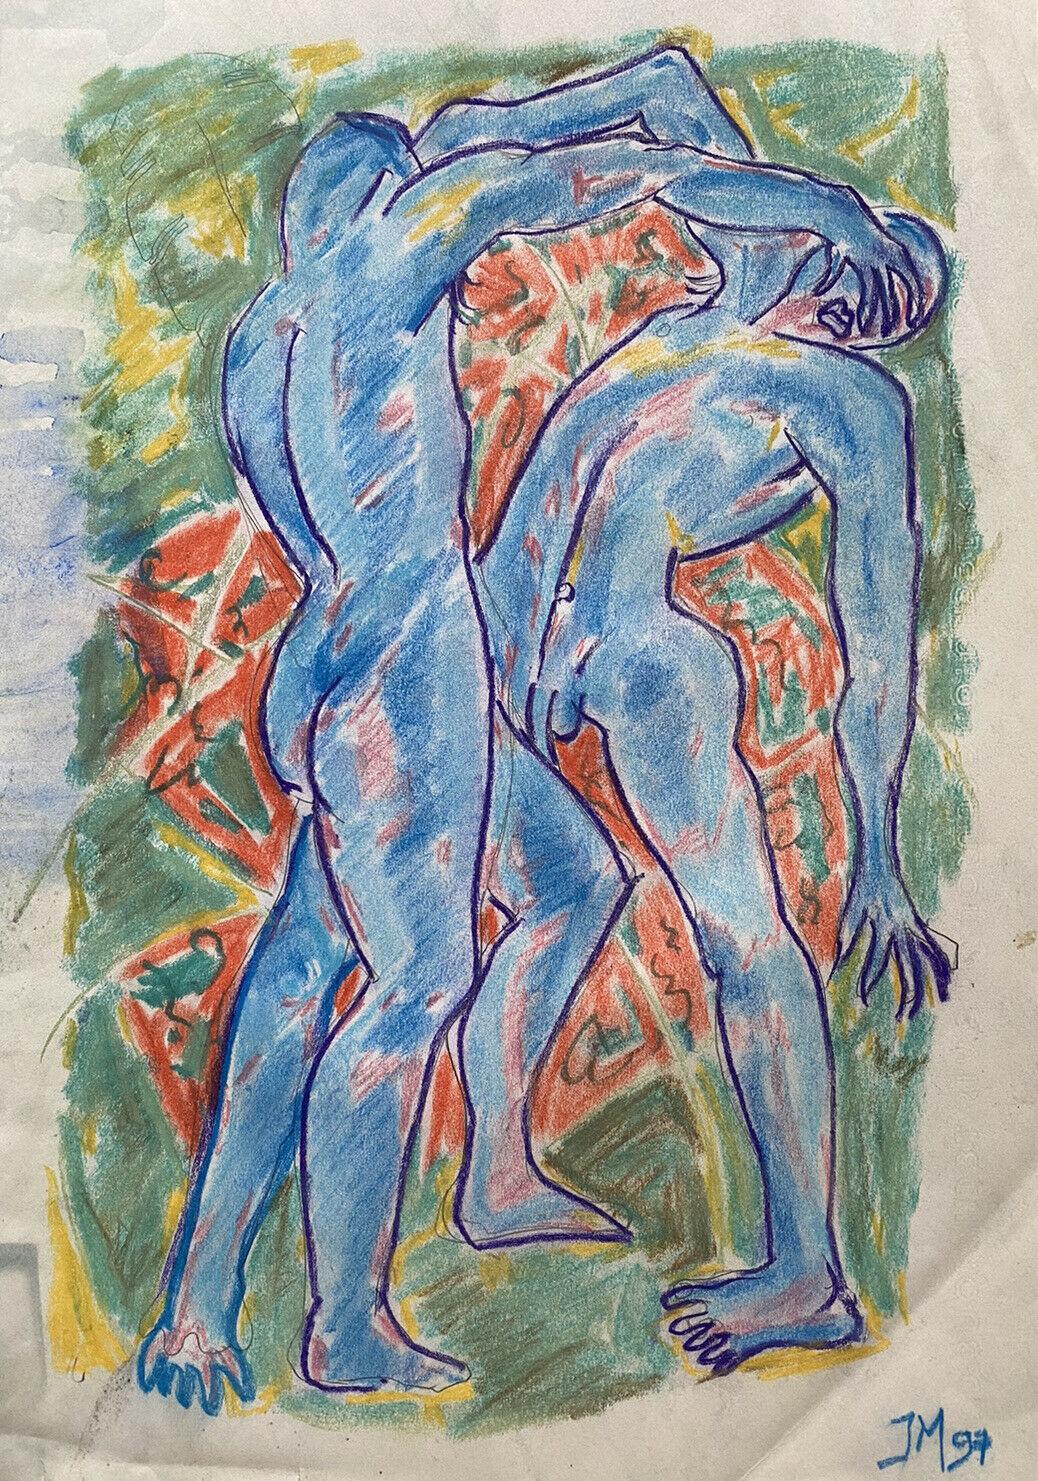 Jean Marc Nude Painting - JEAN MARC (1949-2019) 20th CENTURY FRENCH MODERNIST PAINTING - FIGHTING MALES